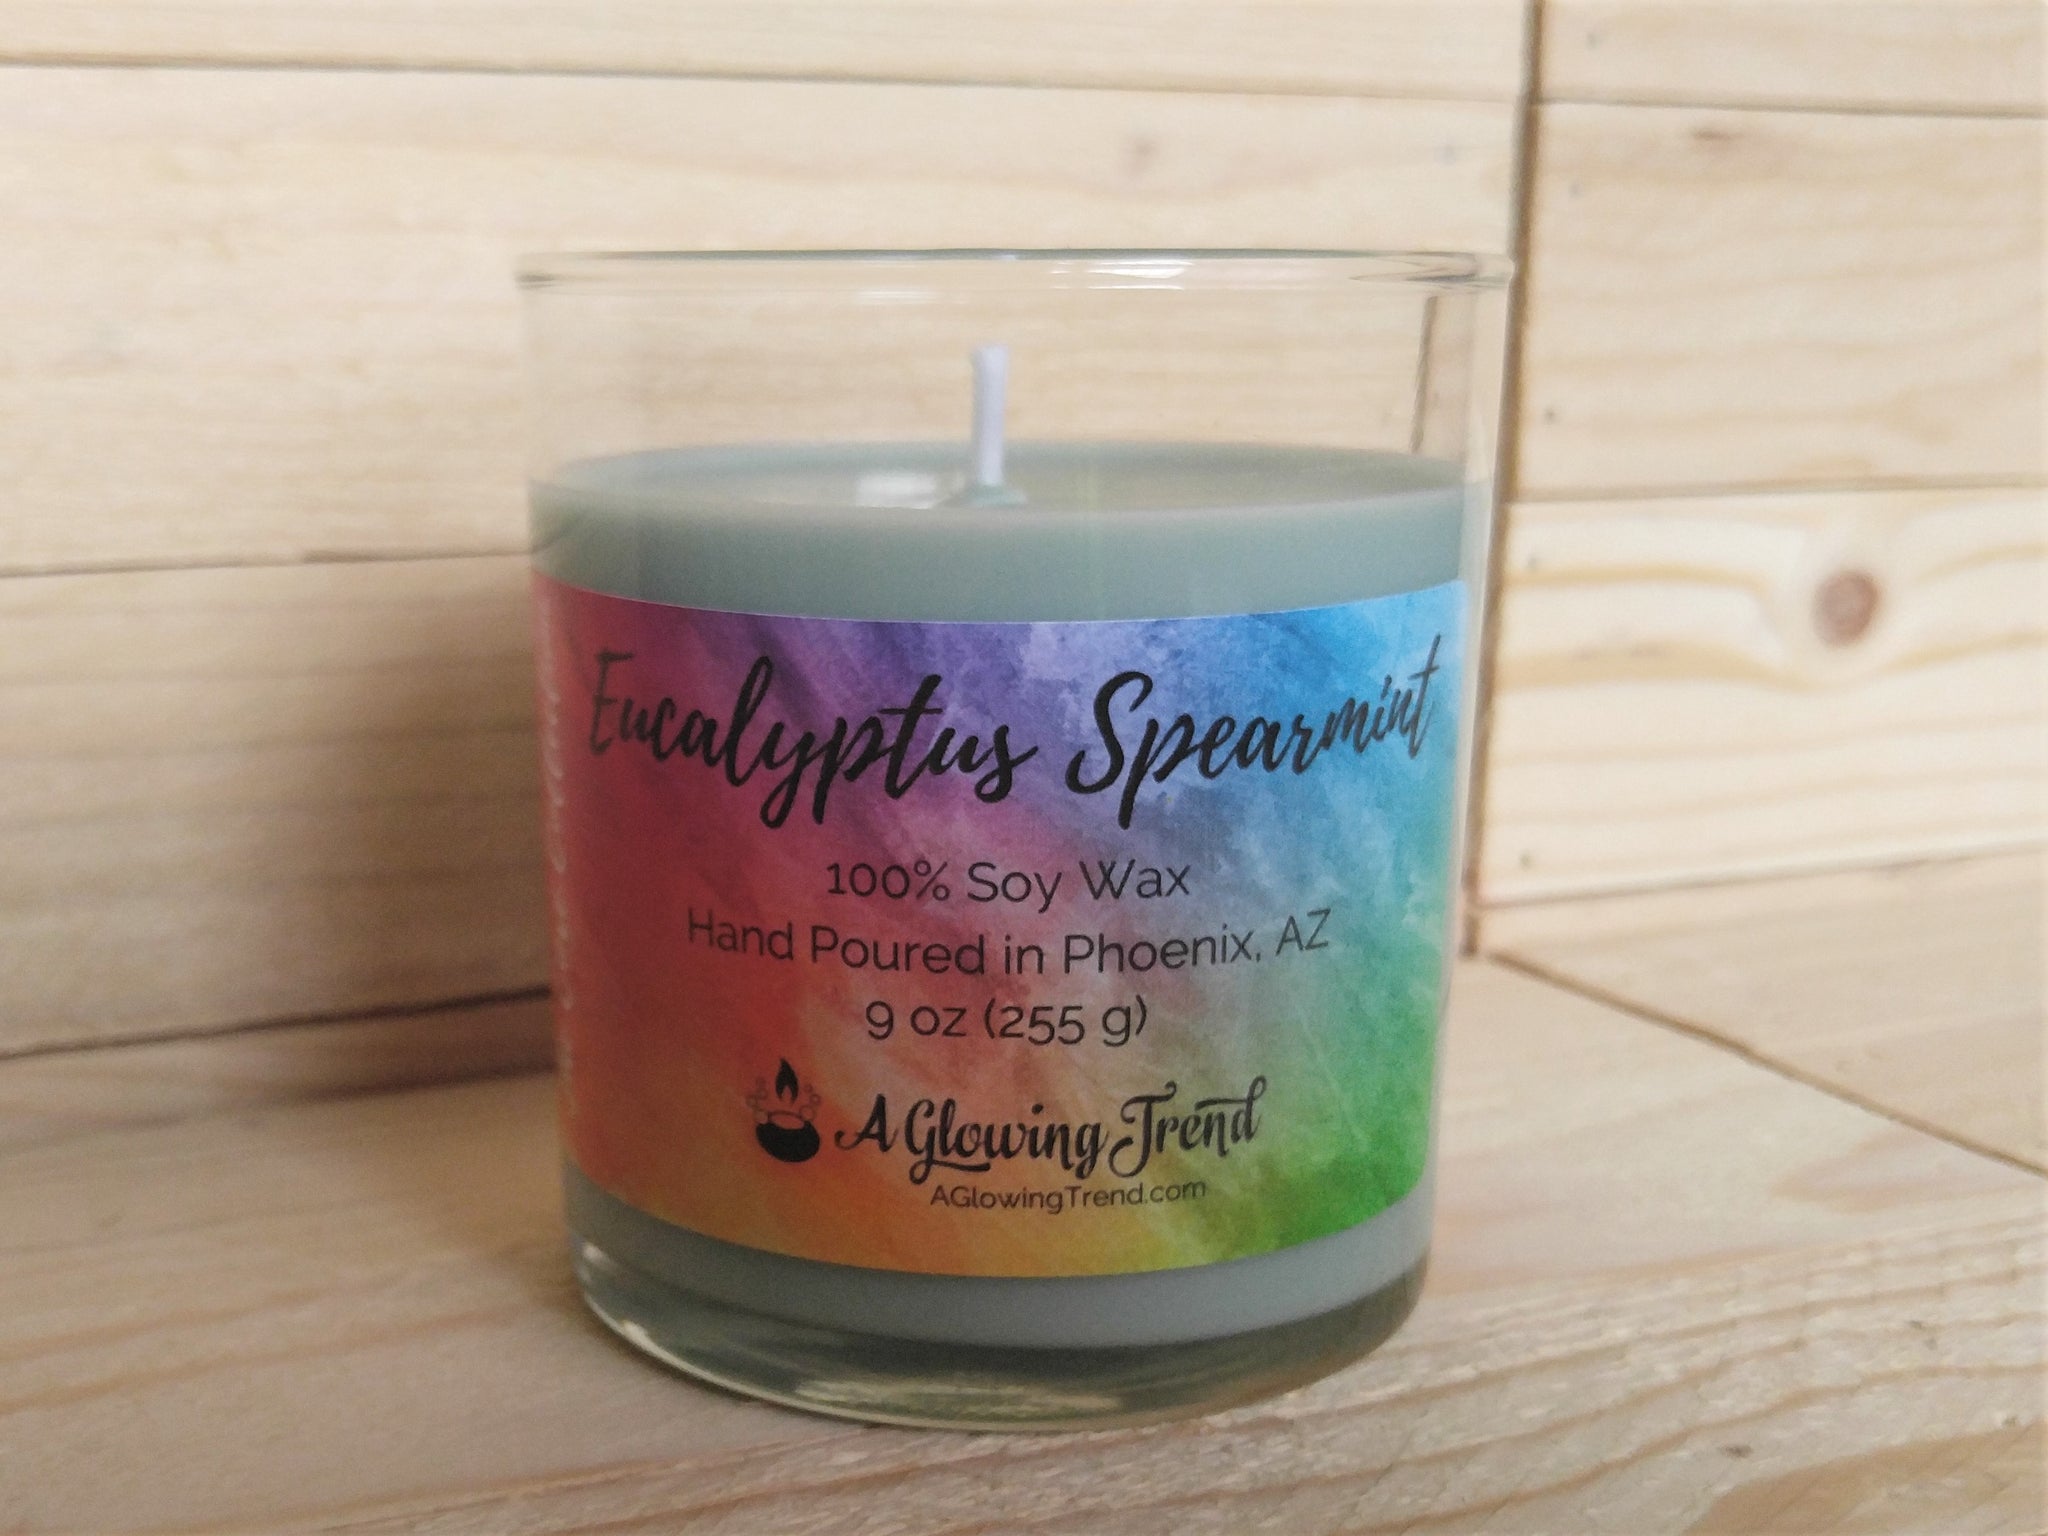 A 9 oz glass tumbler containing a light green Eucalyptus Spearmint scented soy candle by A Glowing Trend